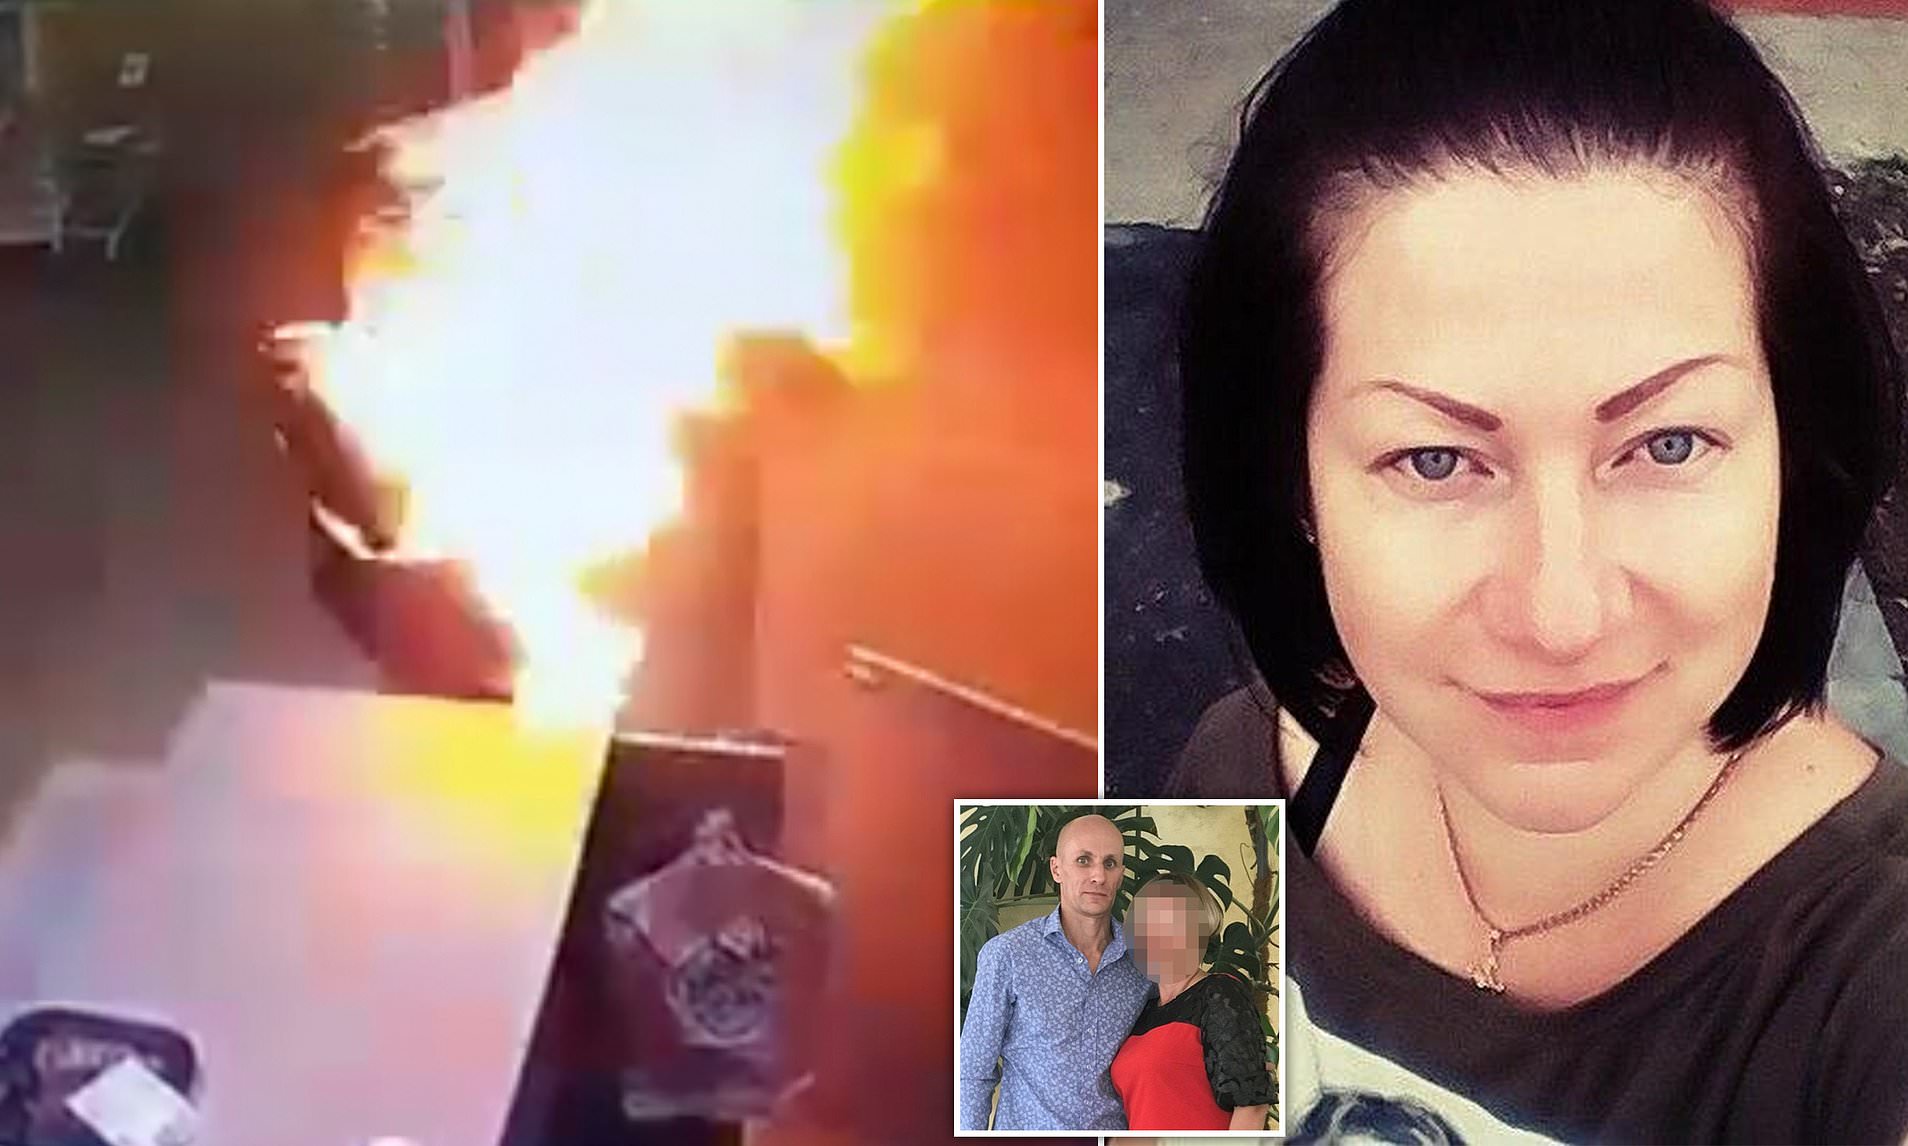 Russian shop worker is turned into a human fireball after 'co-worker ex-lover doused her in petrol and set her alight when she ended their relationship', leaving her with serious injuries